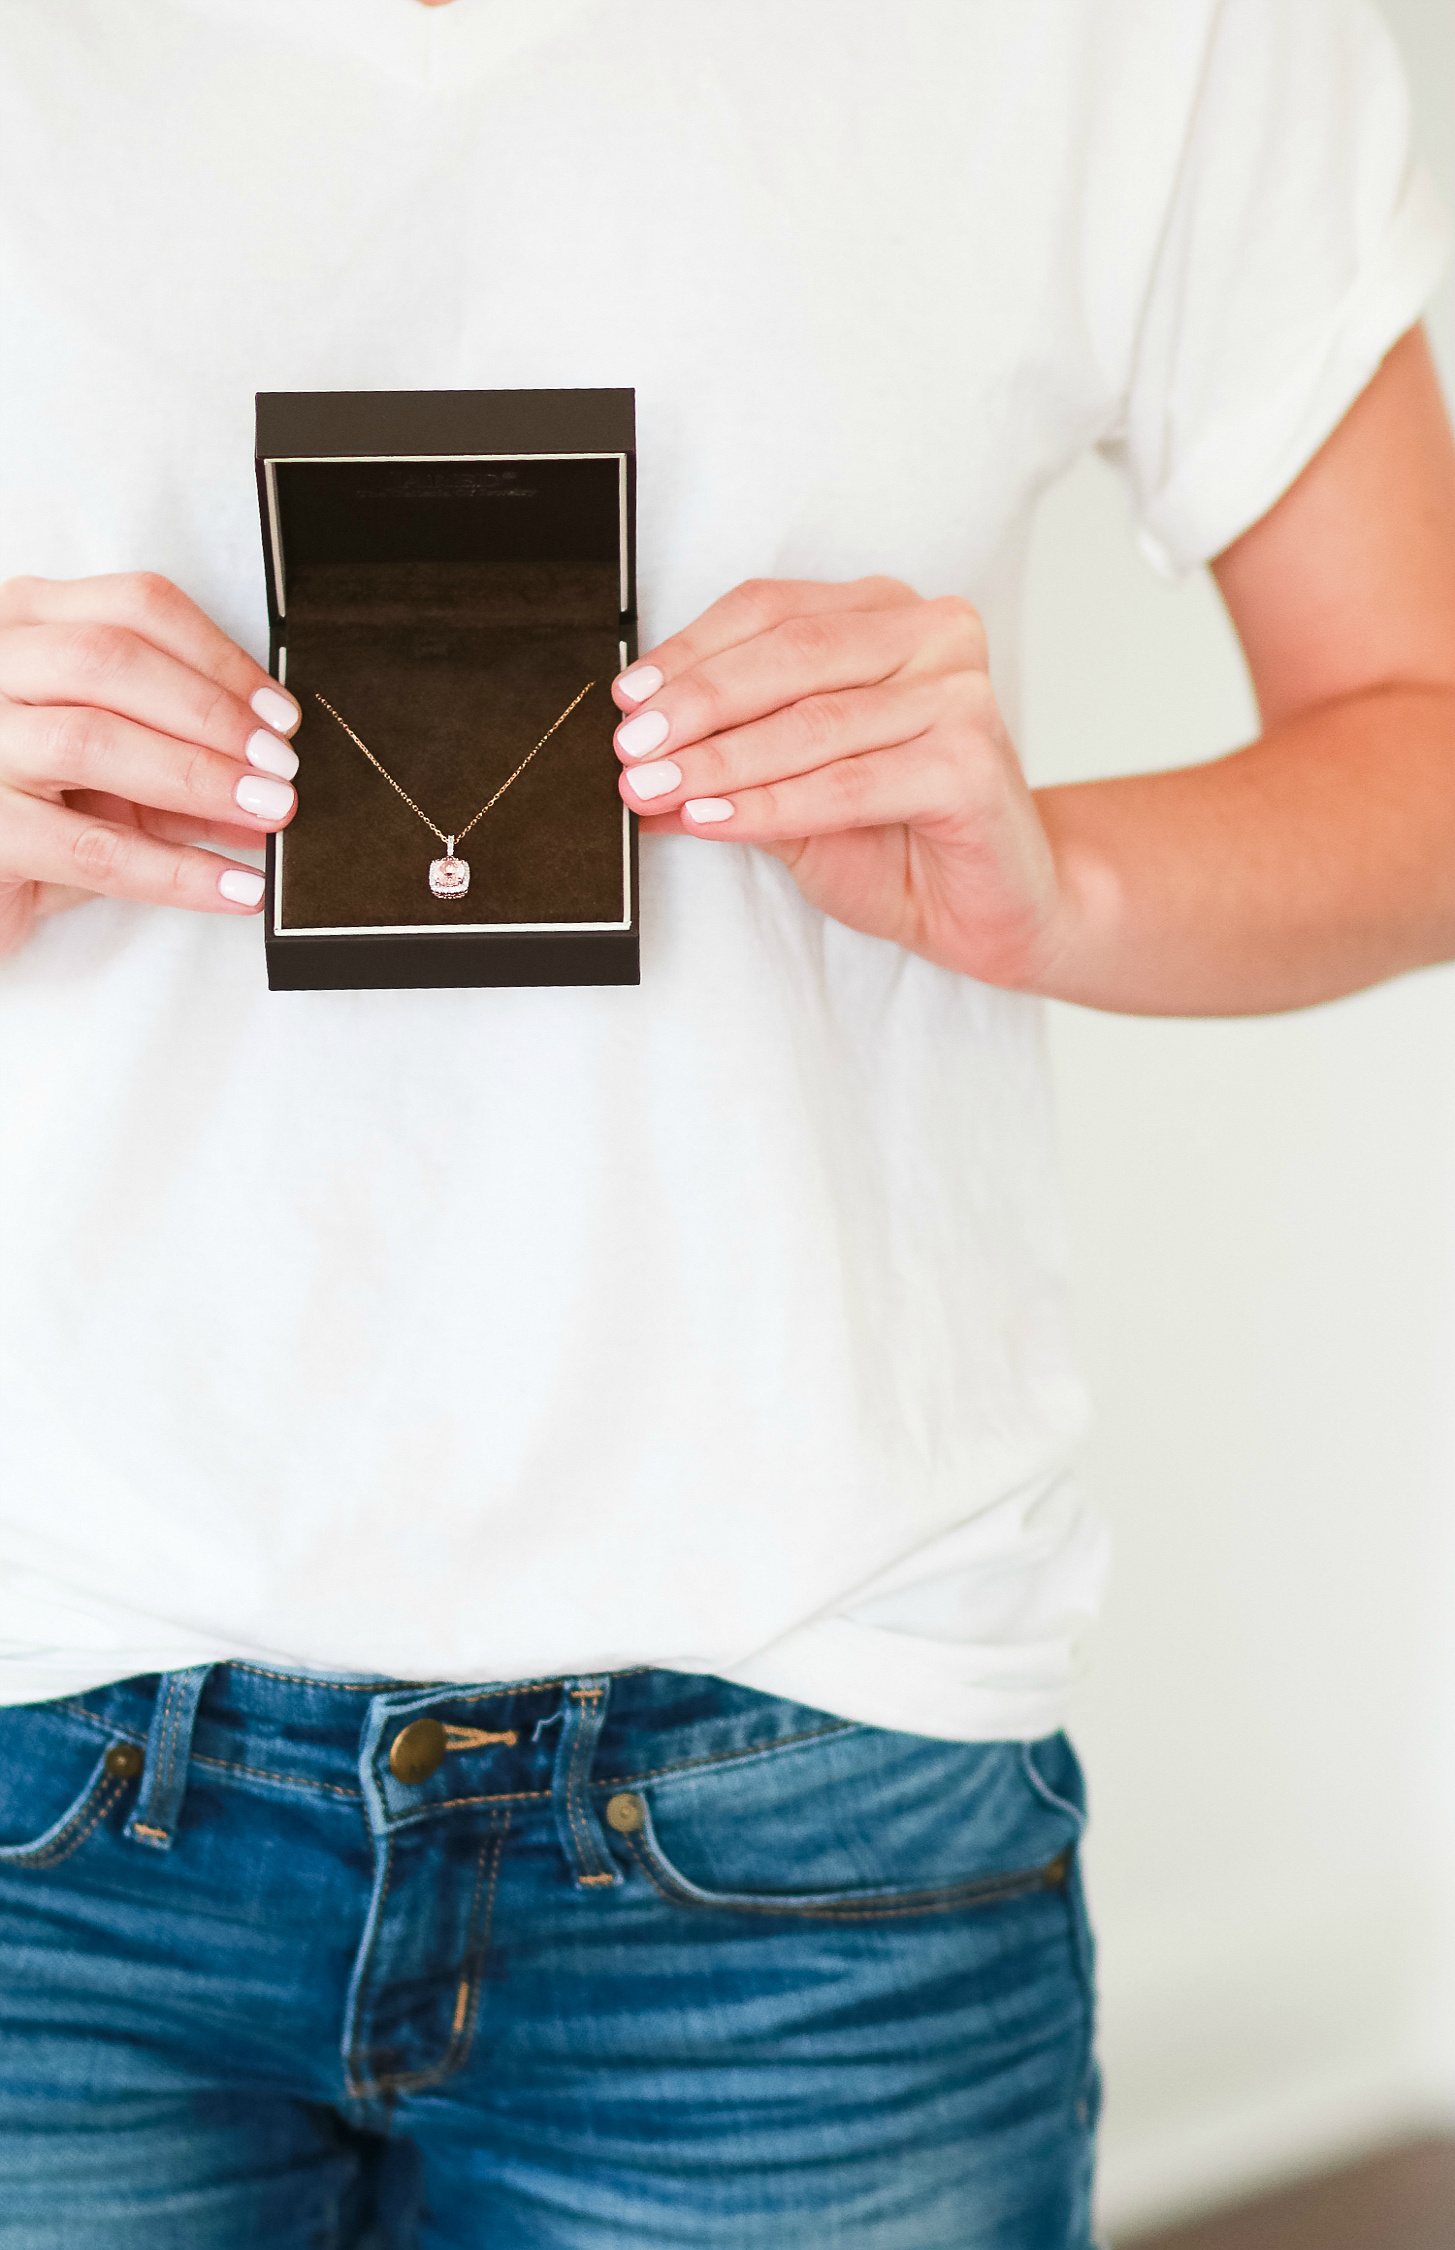 Sentimental new mom gift idea from Jared | Sentimental gift for new mom | Celebrate Timeless Moments: New Mommy Gift Idea with Jared The Galleria Of Jewelry by fashion blogger Stephanie Ziajka from Diary of a Debutante